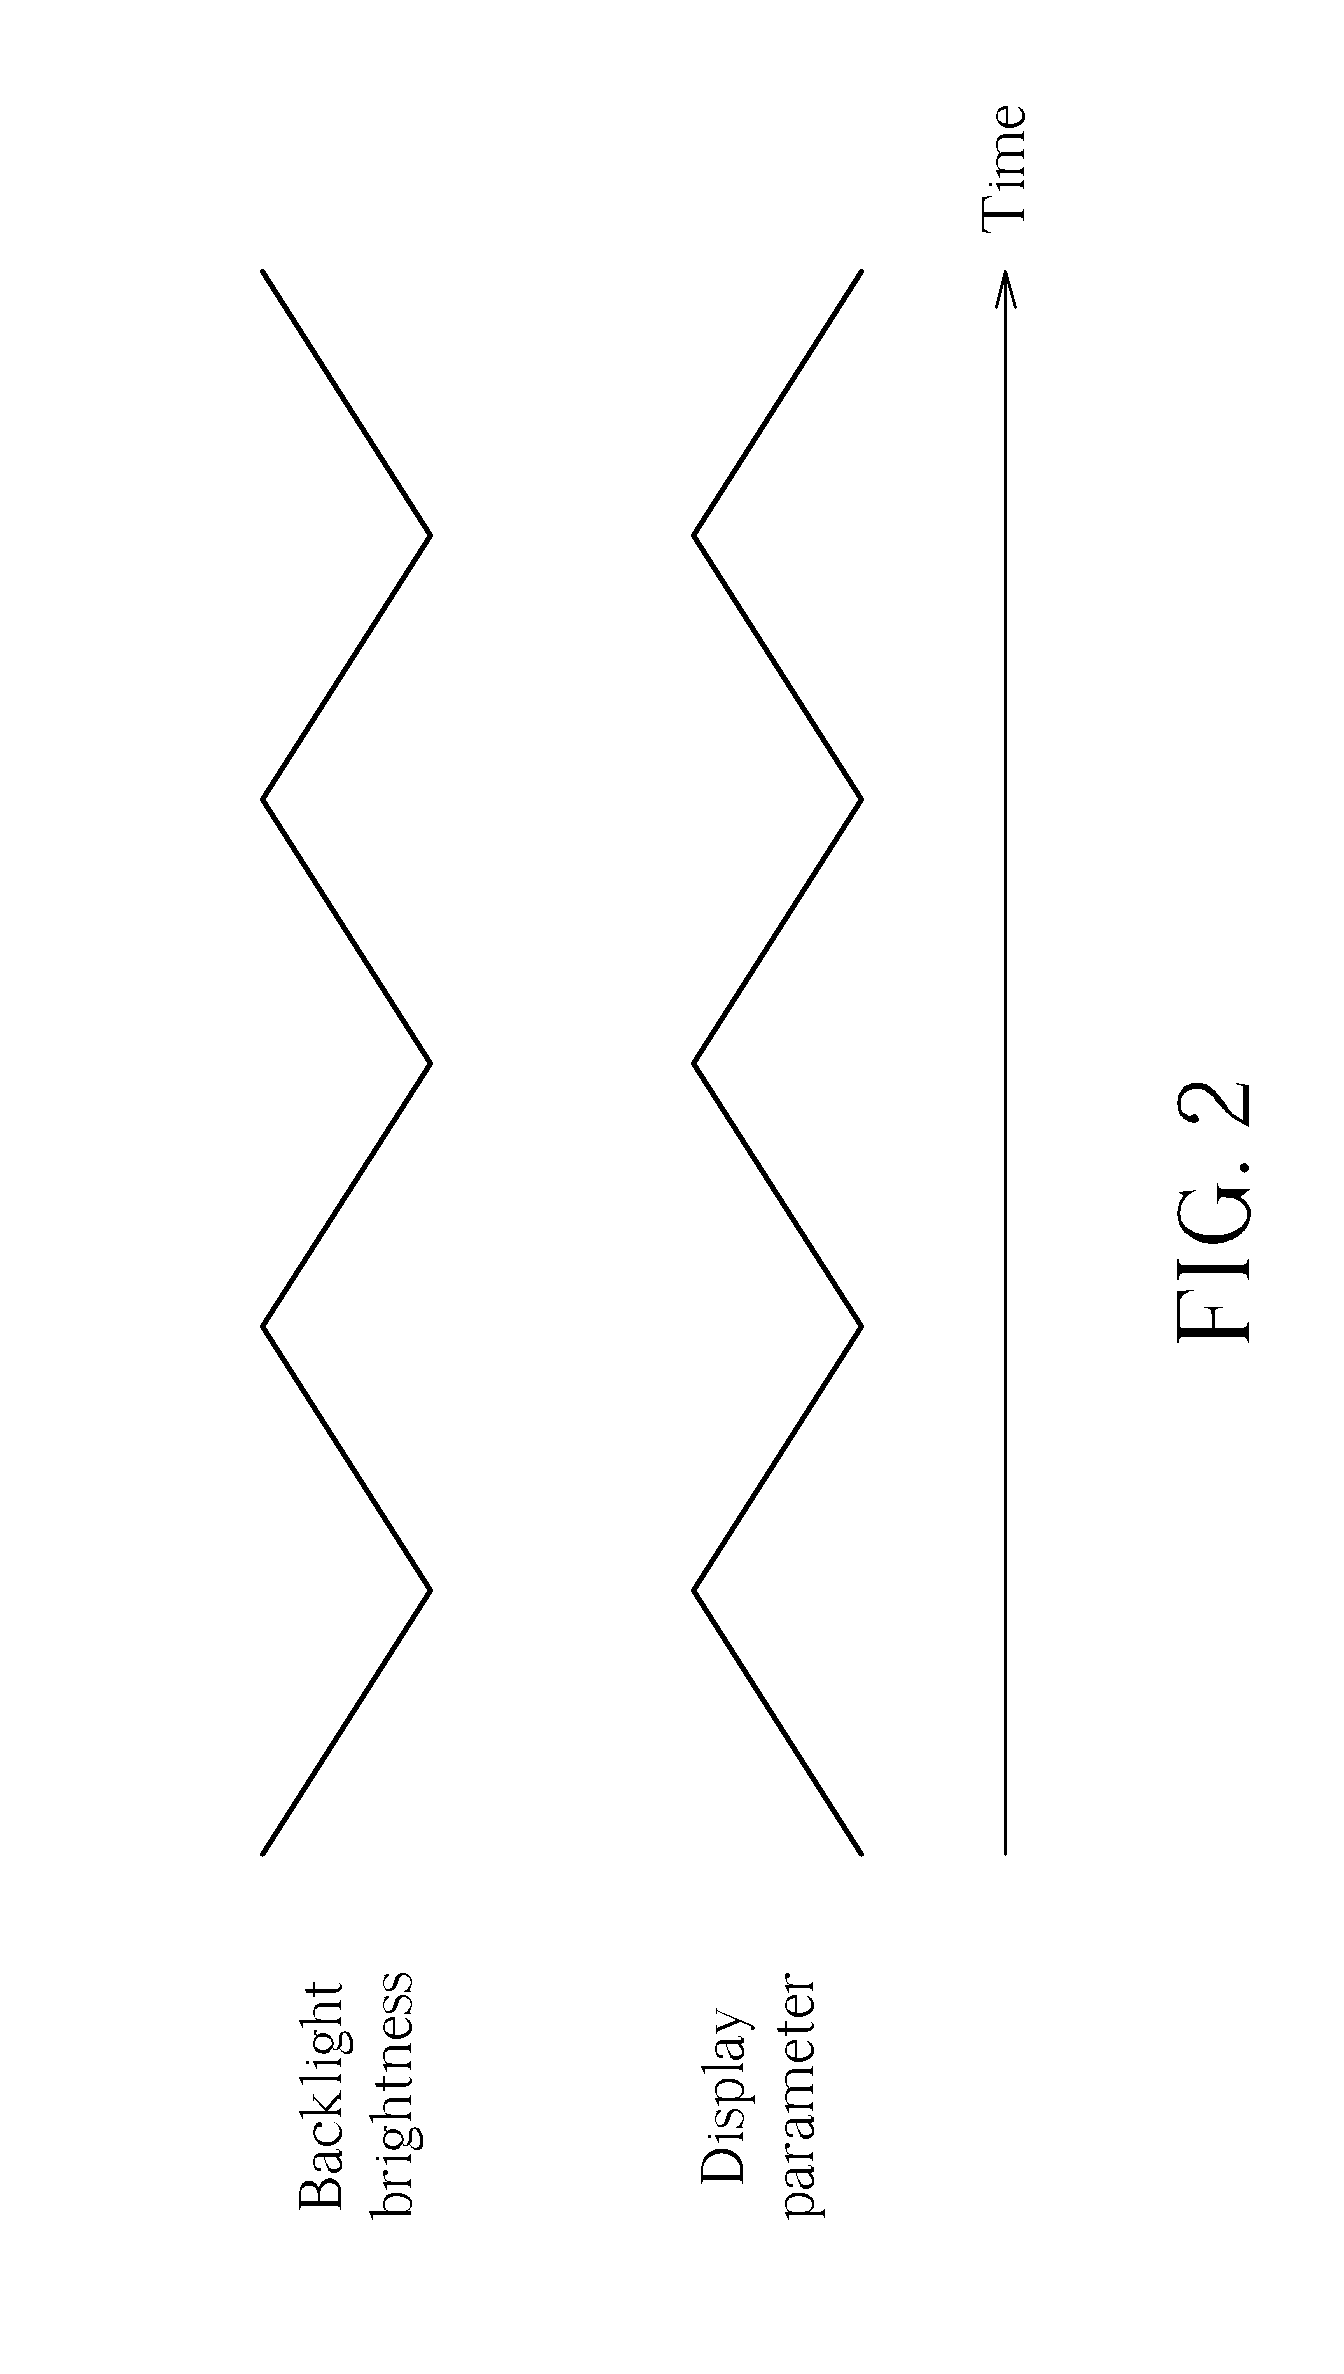 Display device and brightness control method capable of reducing power consumption of display device